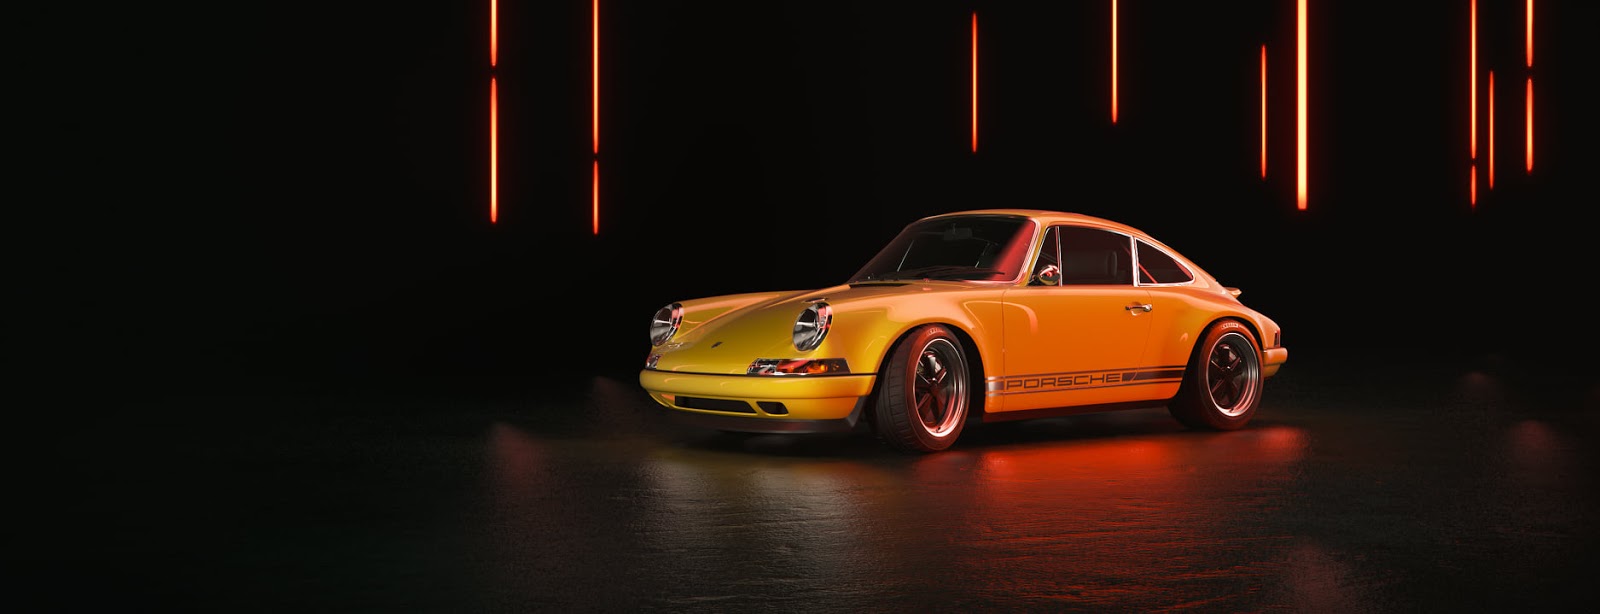 Porsche 911 Experimental Renders By Yonghee Yi Using Maxon Cinema4d Redshift 3d And Adobe After Effects Redshift Render Blog